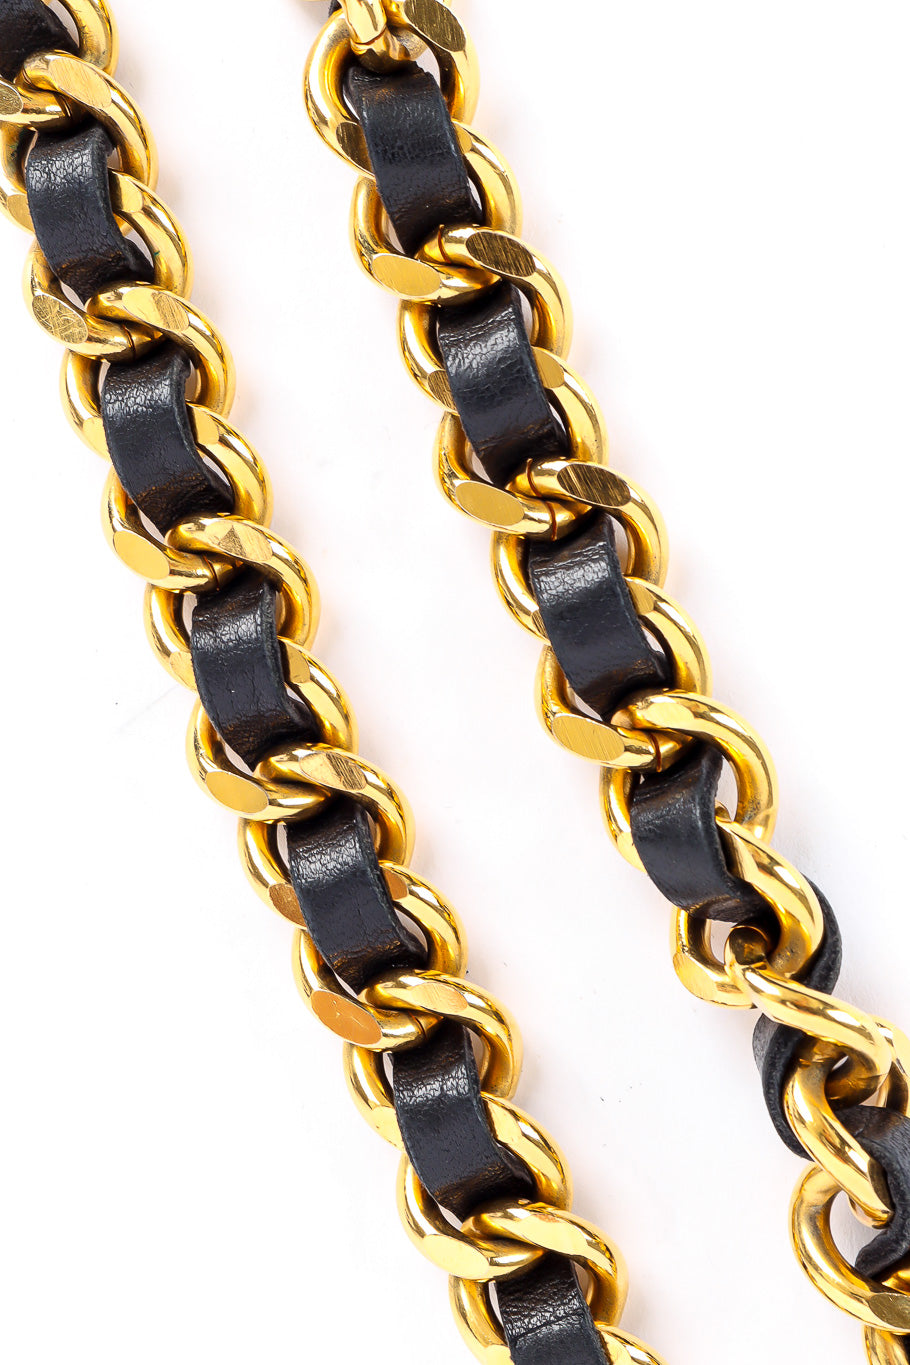 Iconic vintage coin belt by Chanel Chain photo details.@recessla